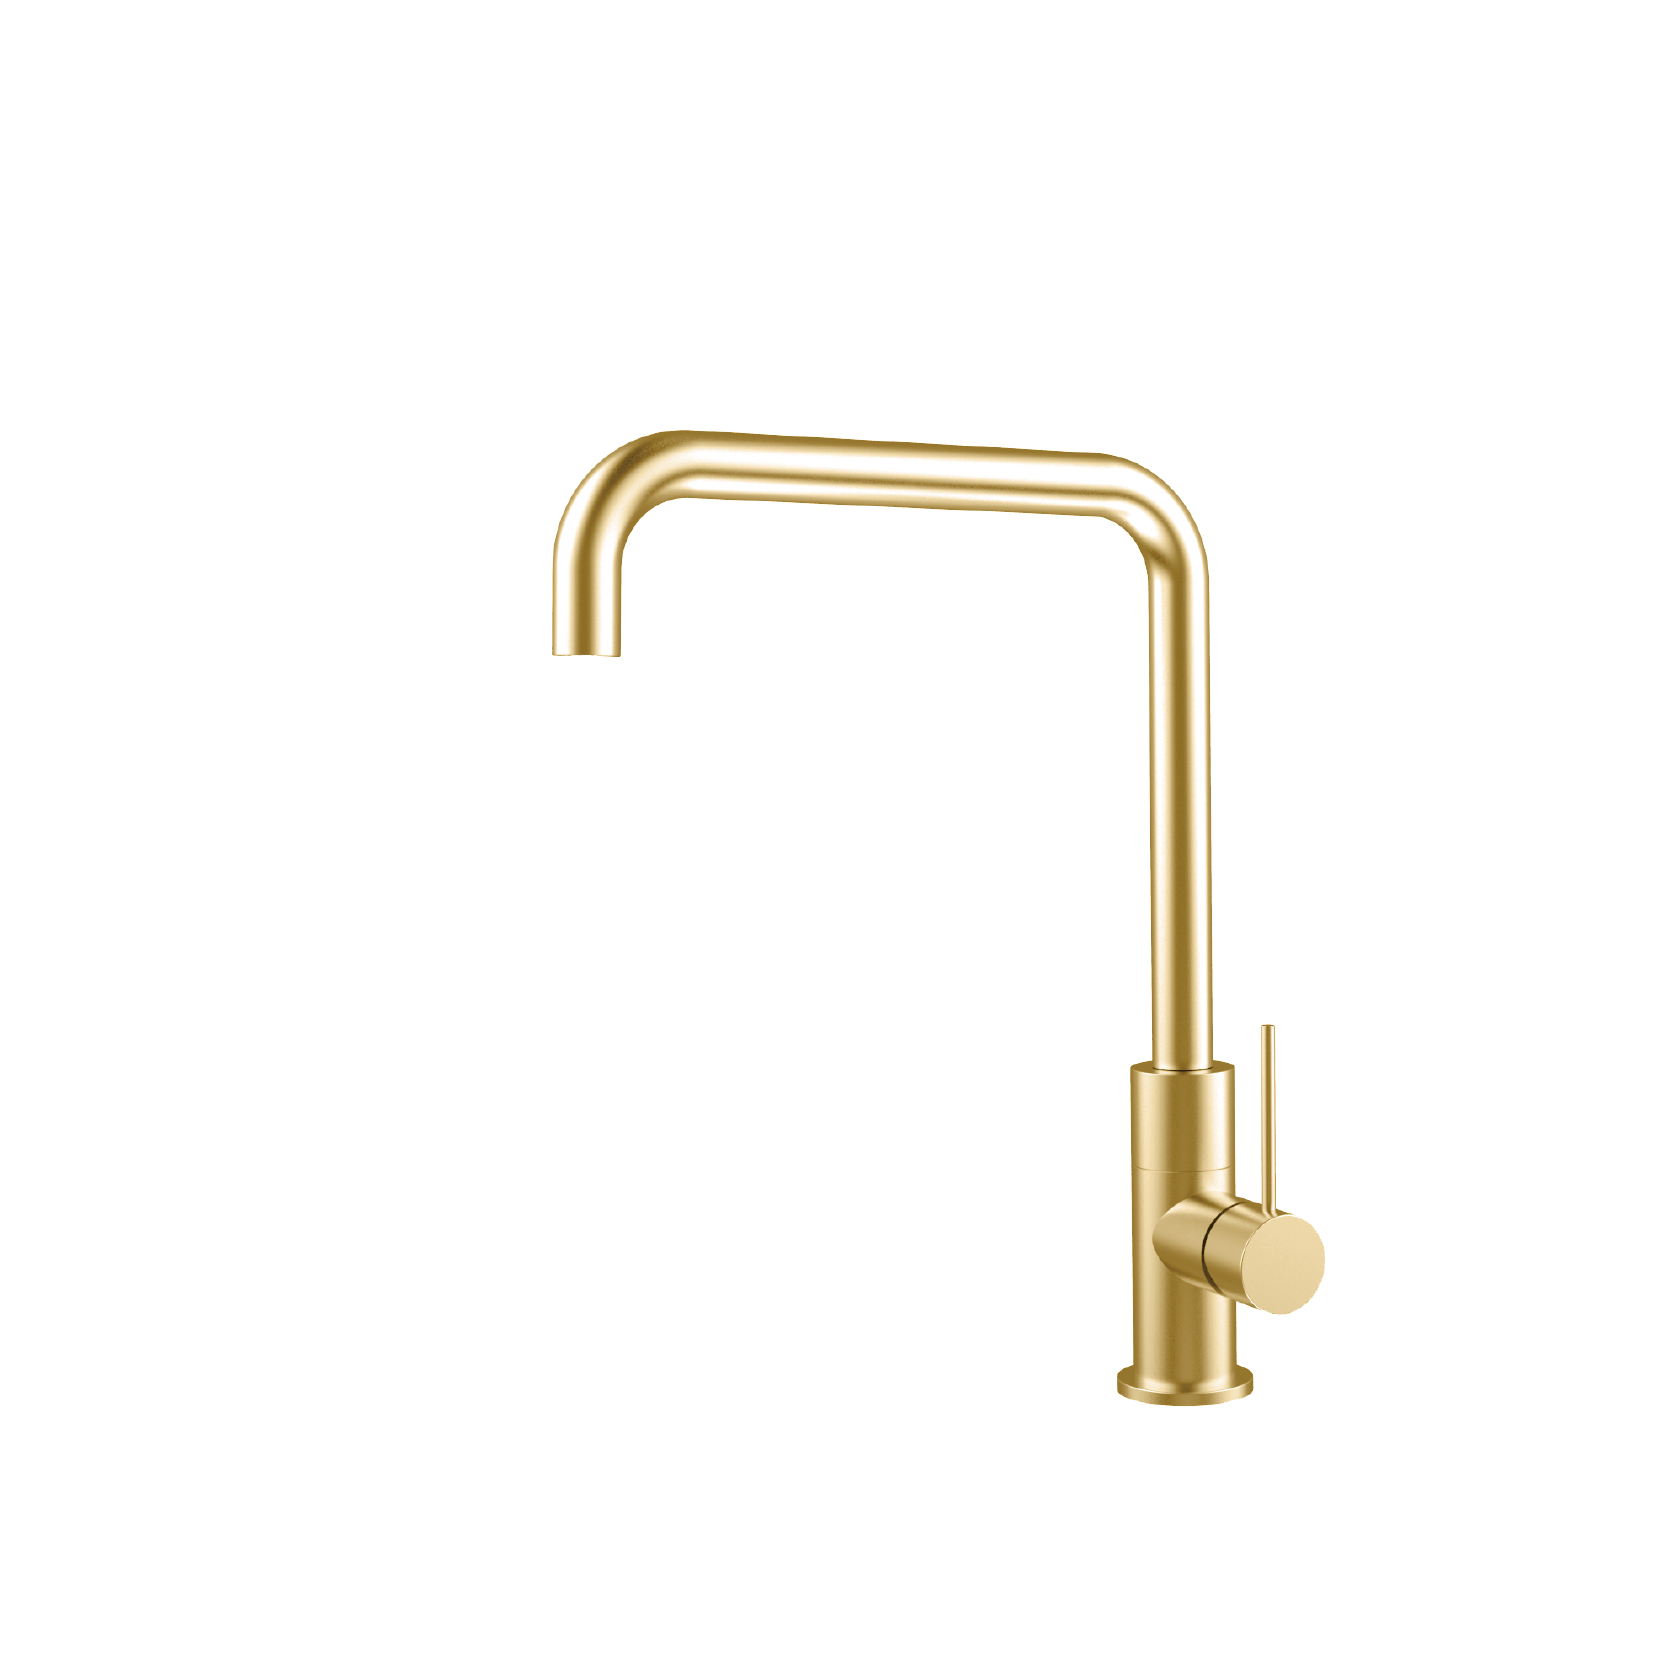 Bexley Square Kitchen Mixer Brushed Brass